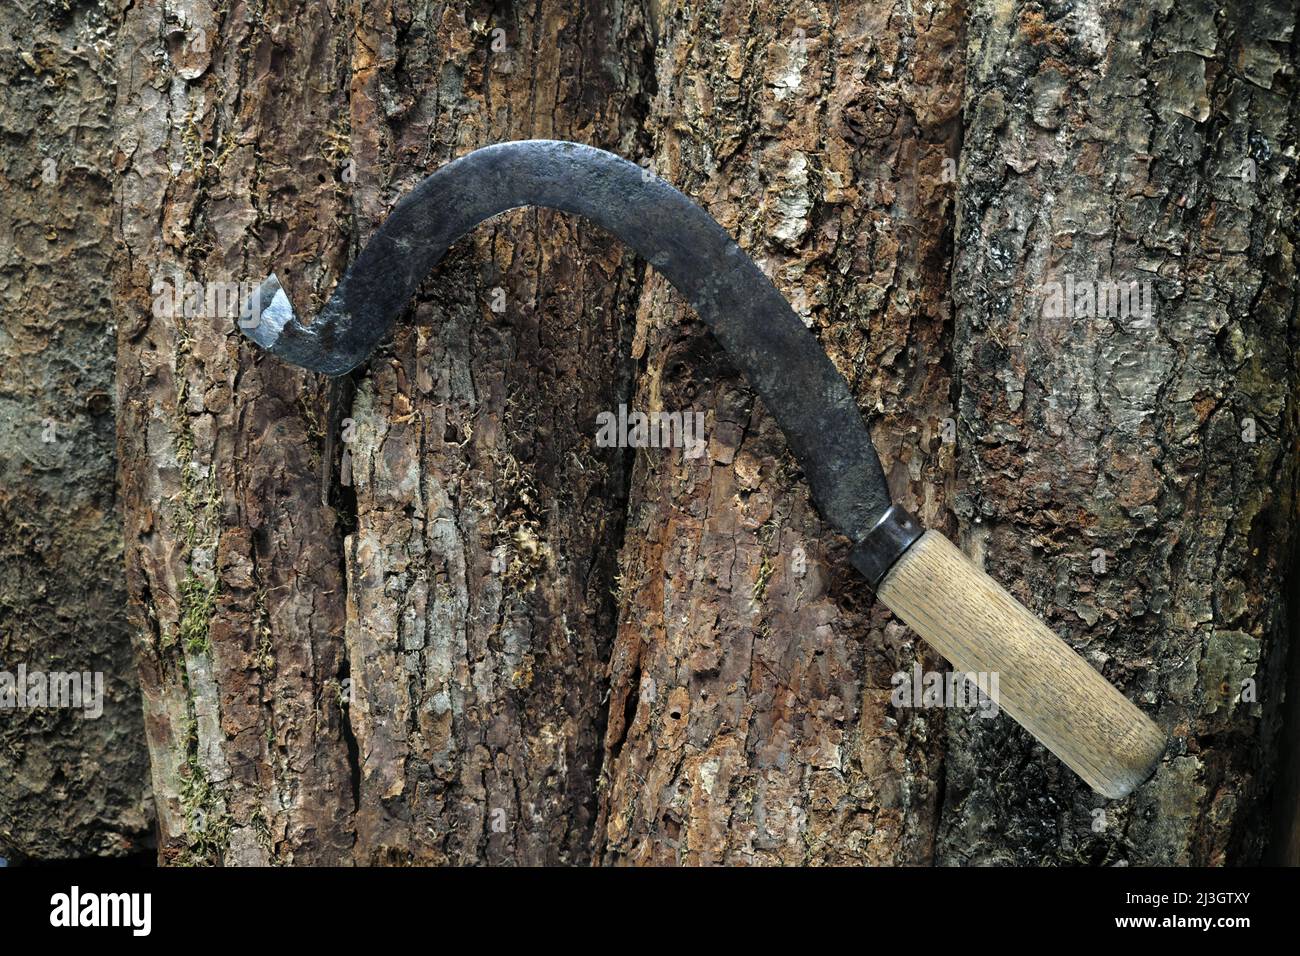 France, Haute Saone, Plancher Bas, tool, sickle for debarking oak, tanning leather Stock Photo